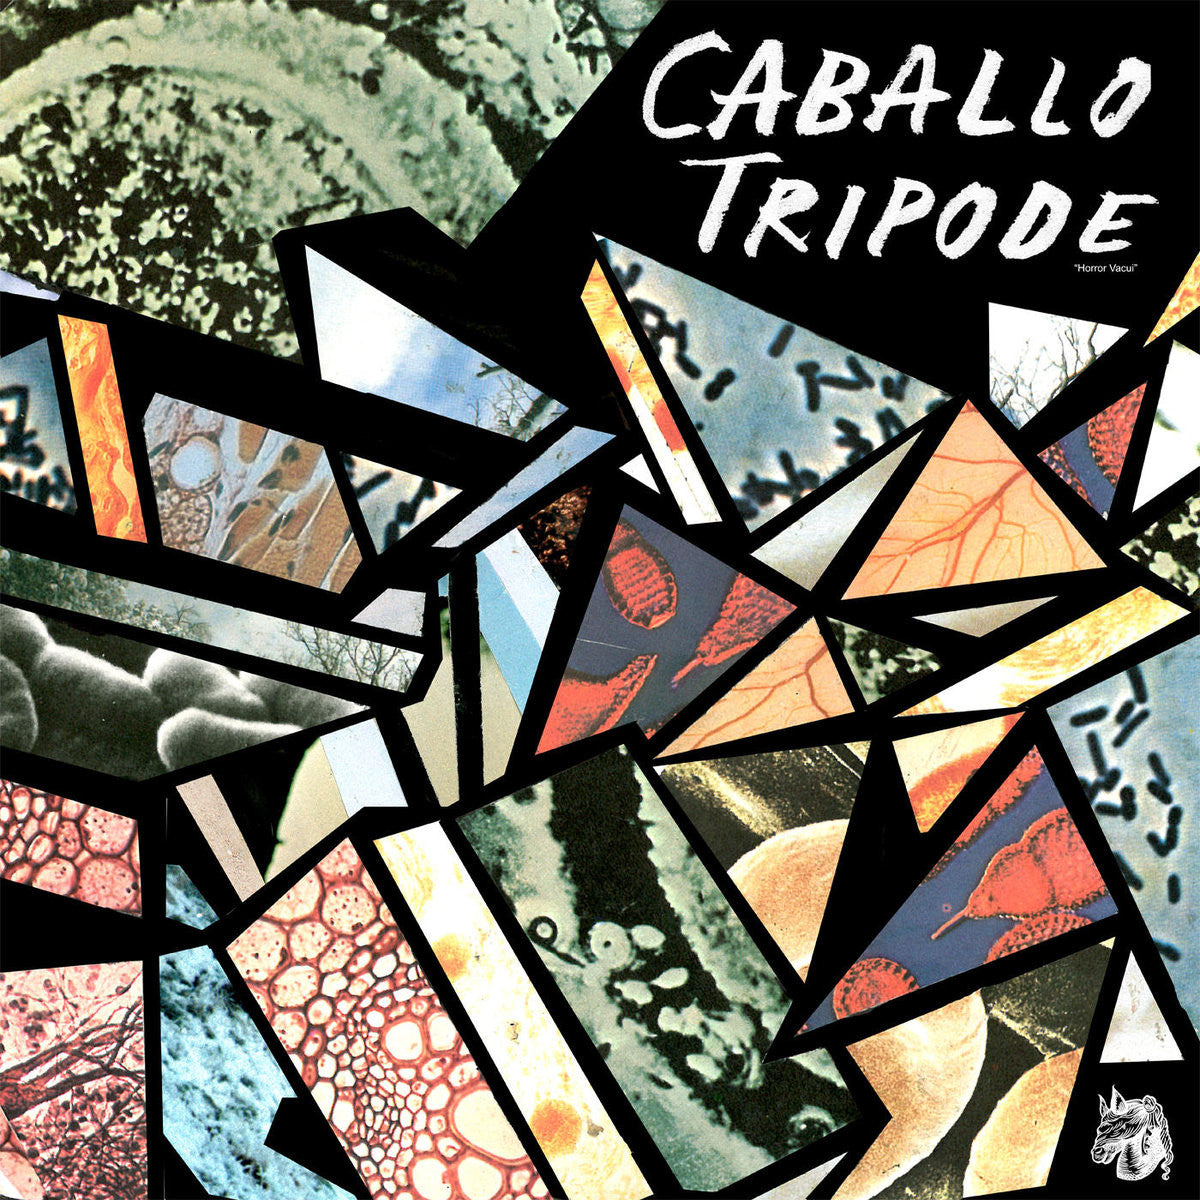 Caballo Tripode - Horror Vacui - New Lp Record 2009 Tic Tac Totally USA Chicago Vinyl - Indie Rock / Lo-Fi